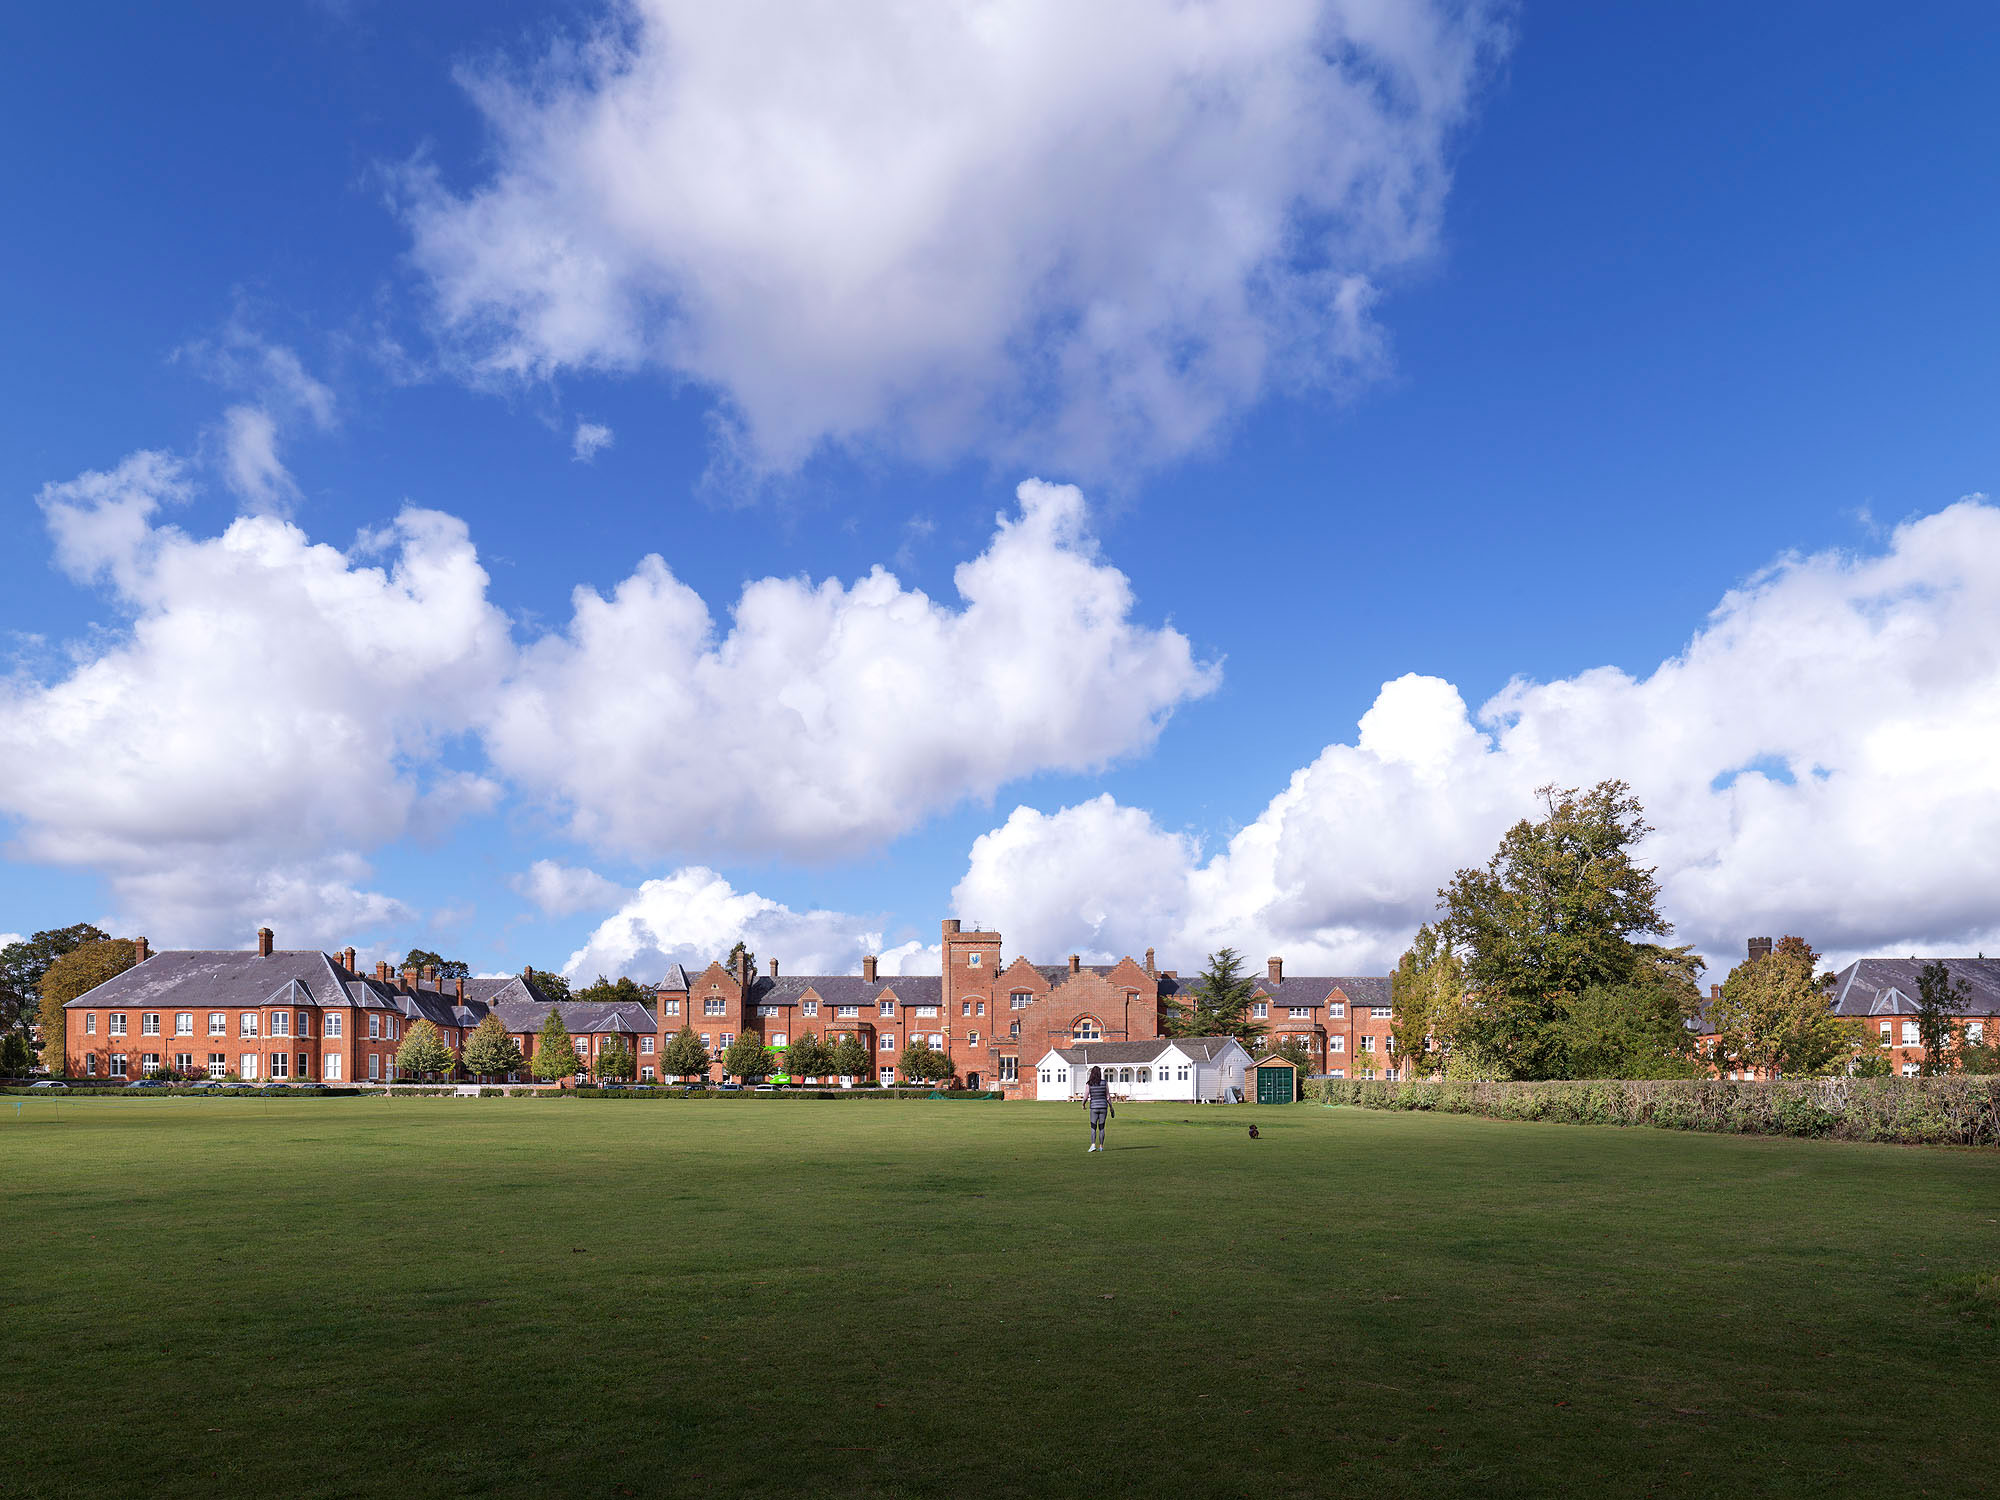 A view over grounds to a redeveloped former Victorian hospital complex.